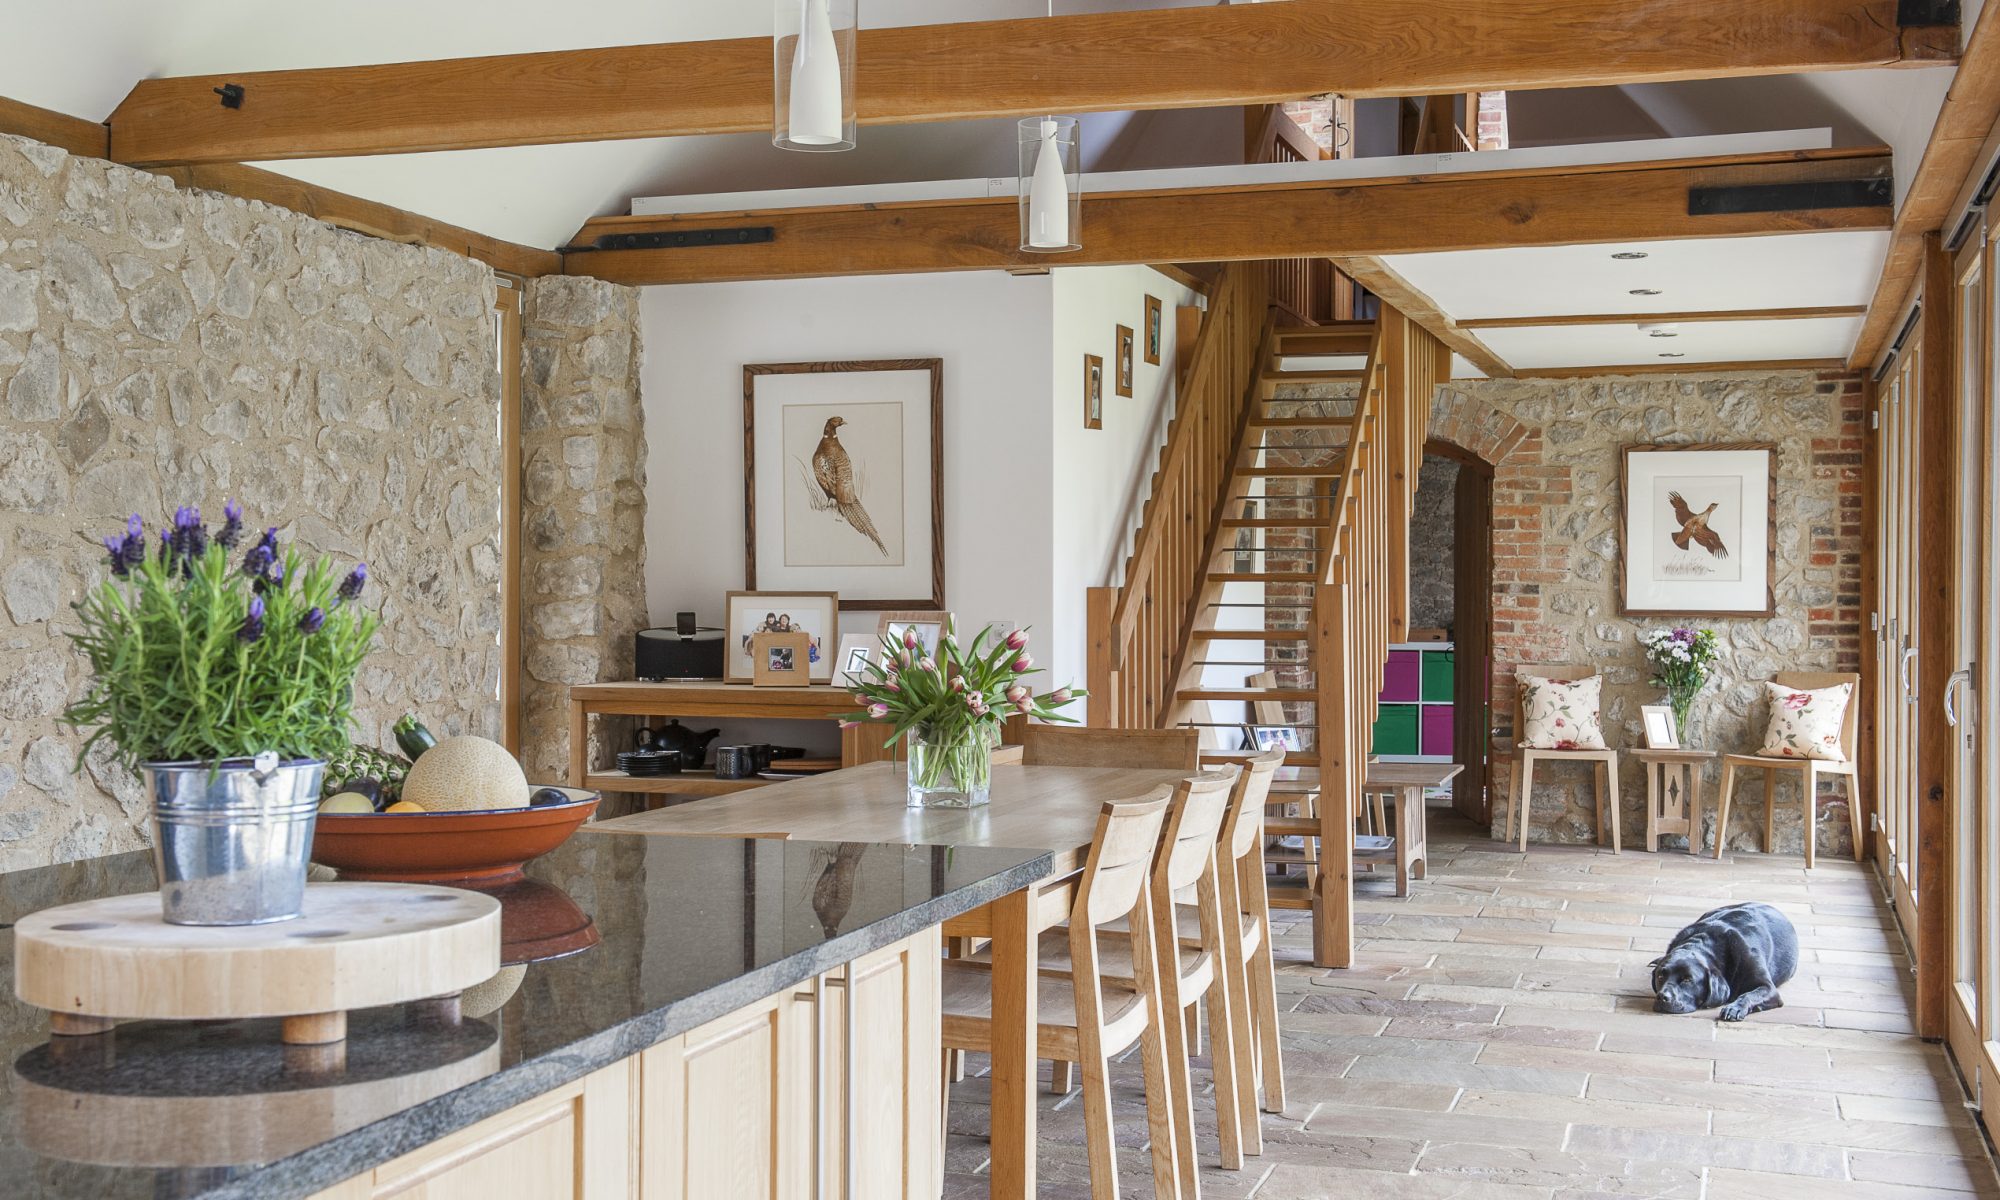 Vicky and James have converted a cluster of former farm buildings into a superb, eco-friendly 21st century family home that won them the Ashford Borough Council 2009 Design Award for Building Conservation...